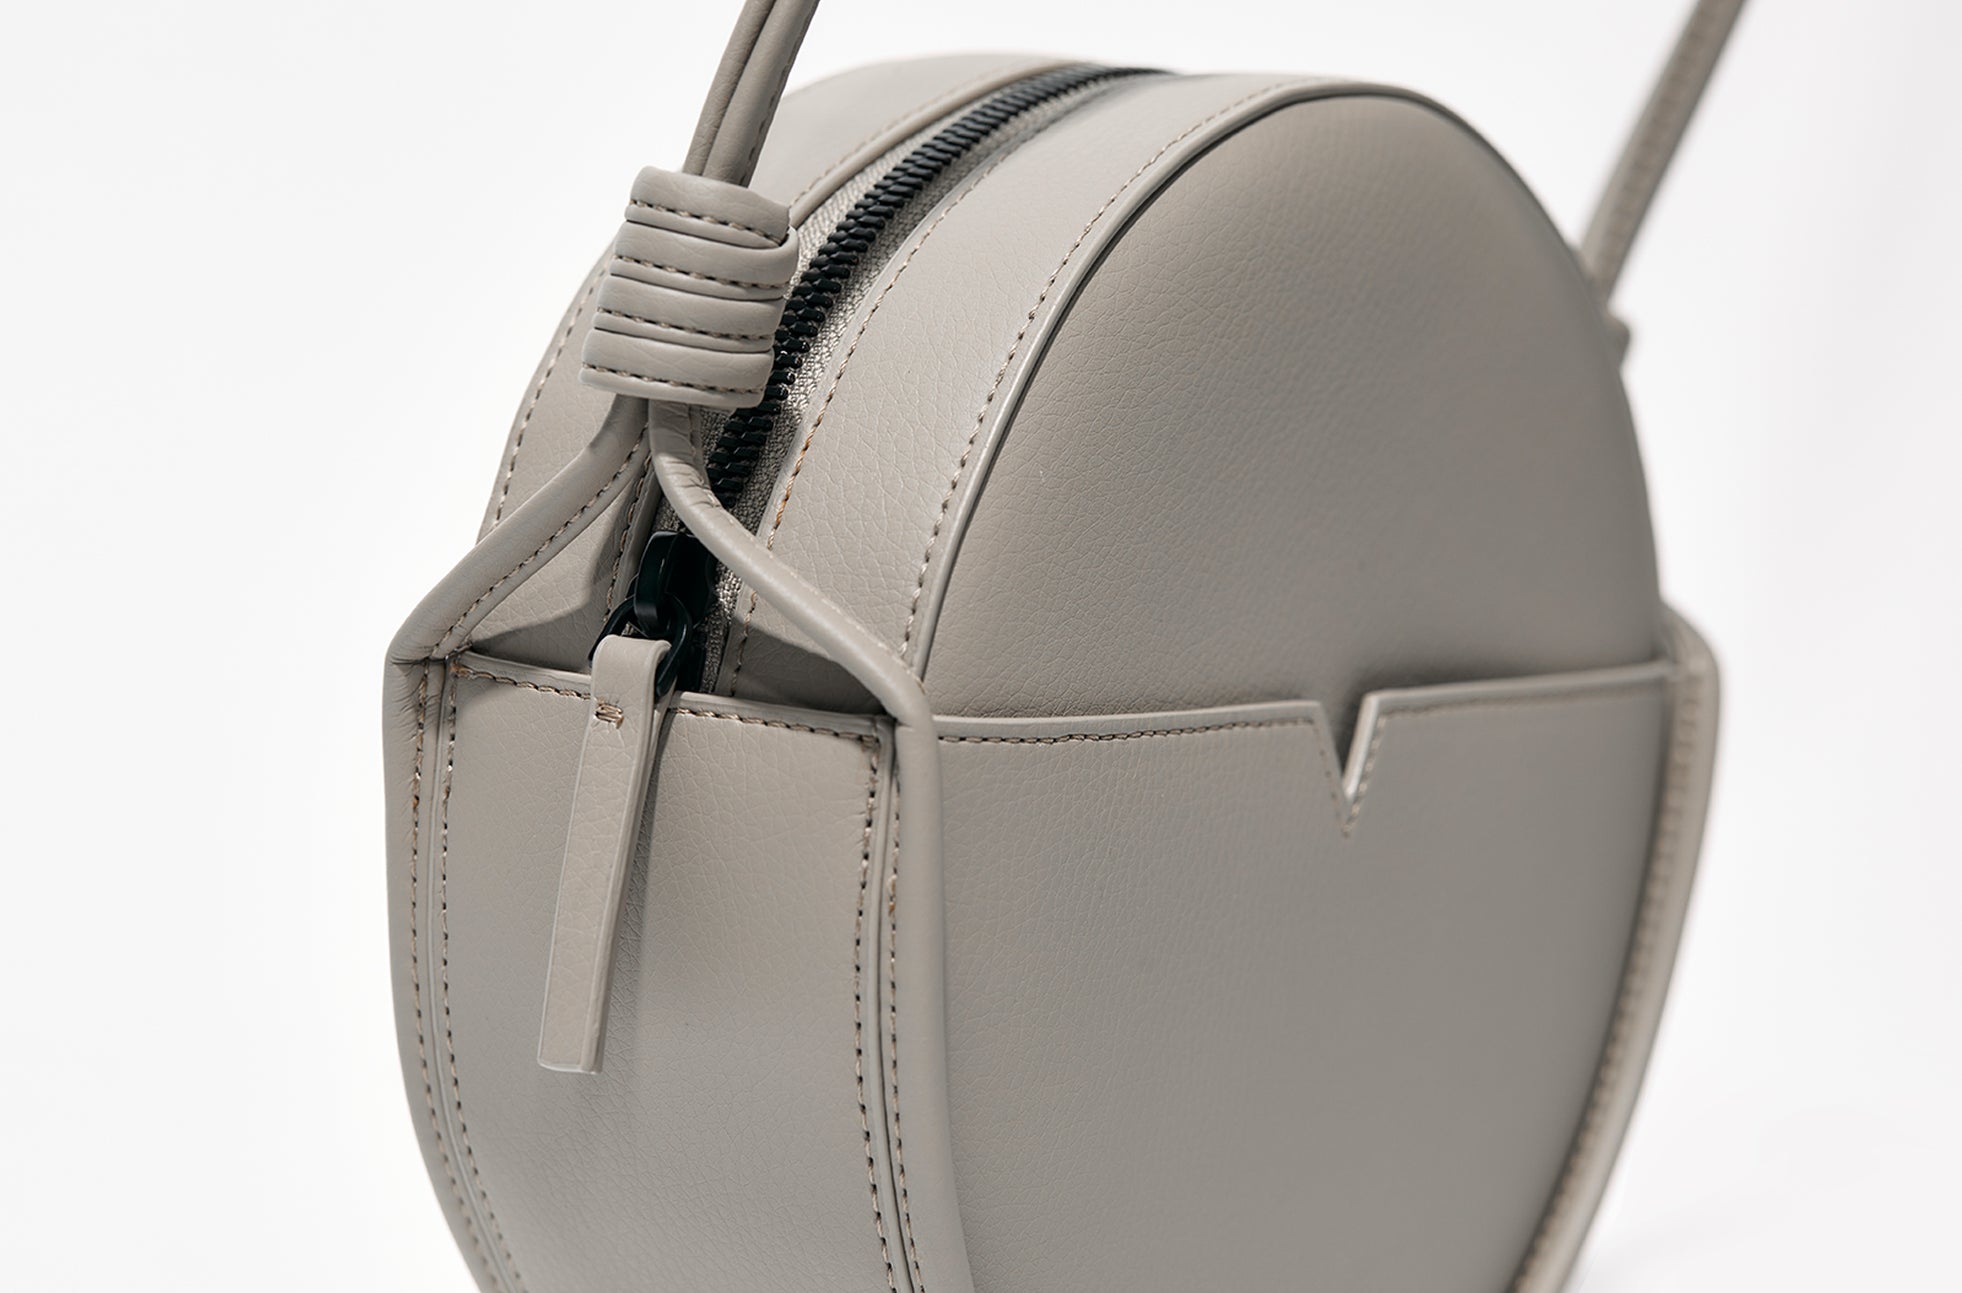 The Circle Crossbody in Banbū Leather in Stone image 5